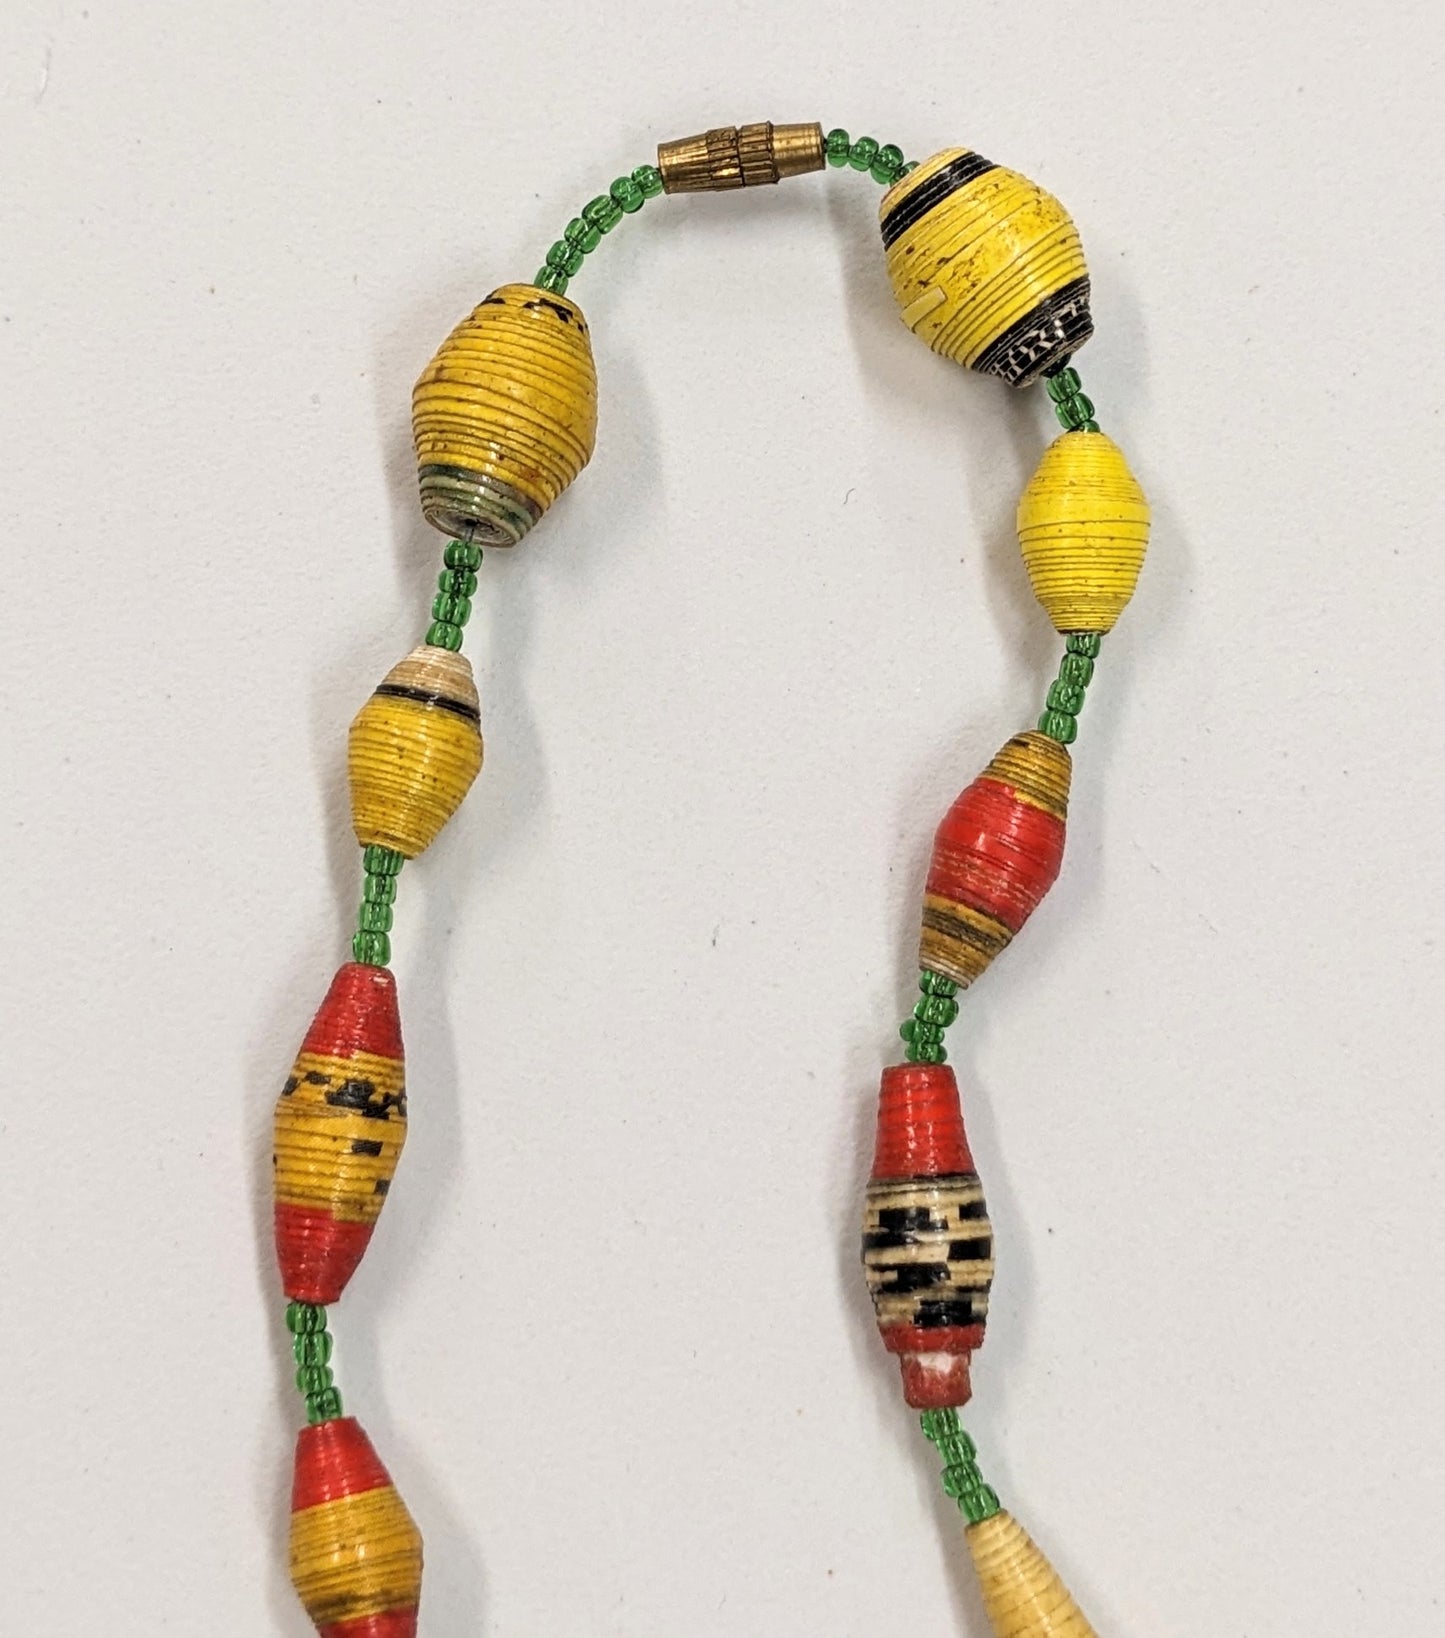 Late 1930s/early 1940s Wooden Necklace